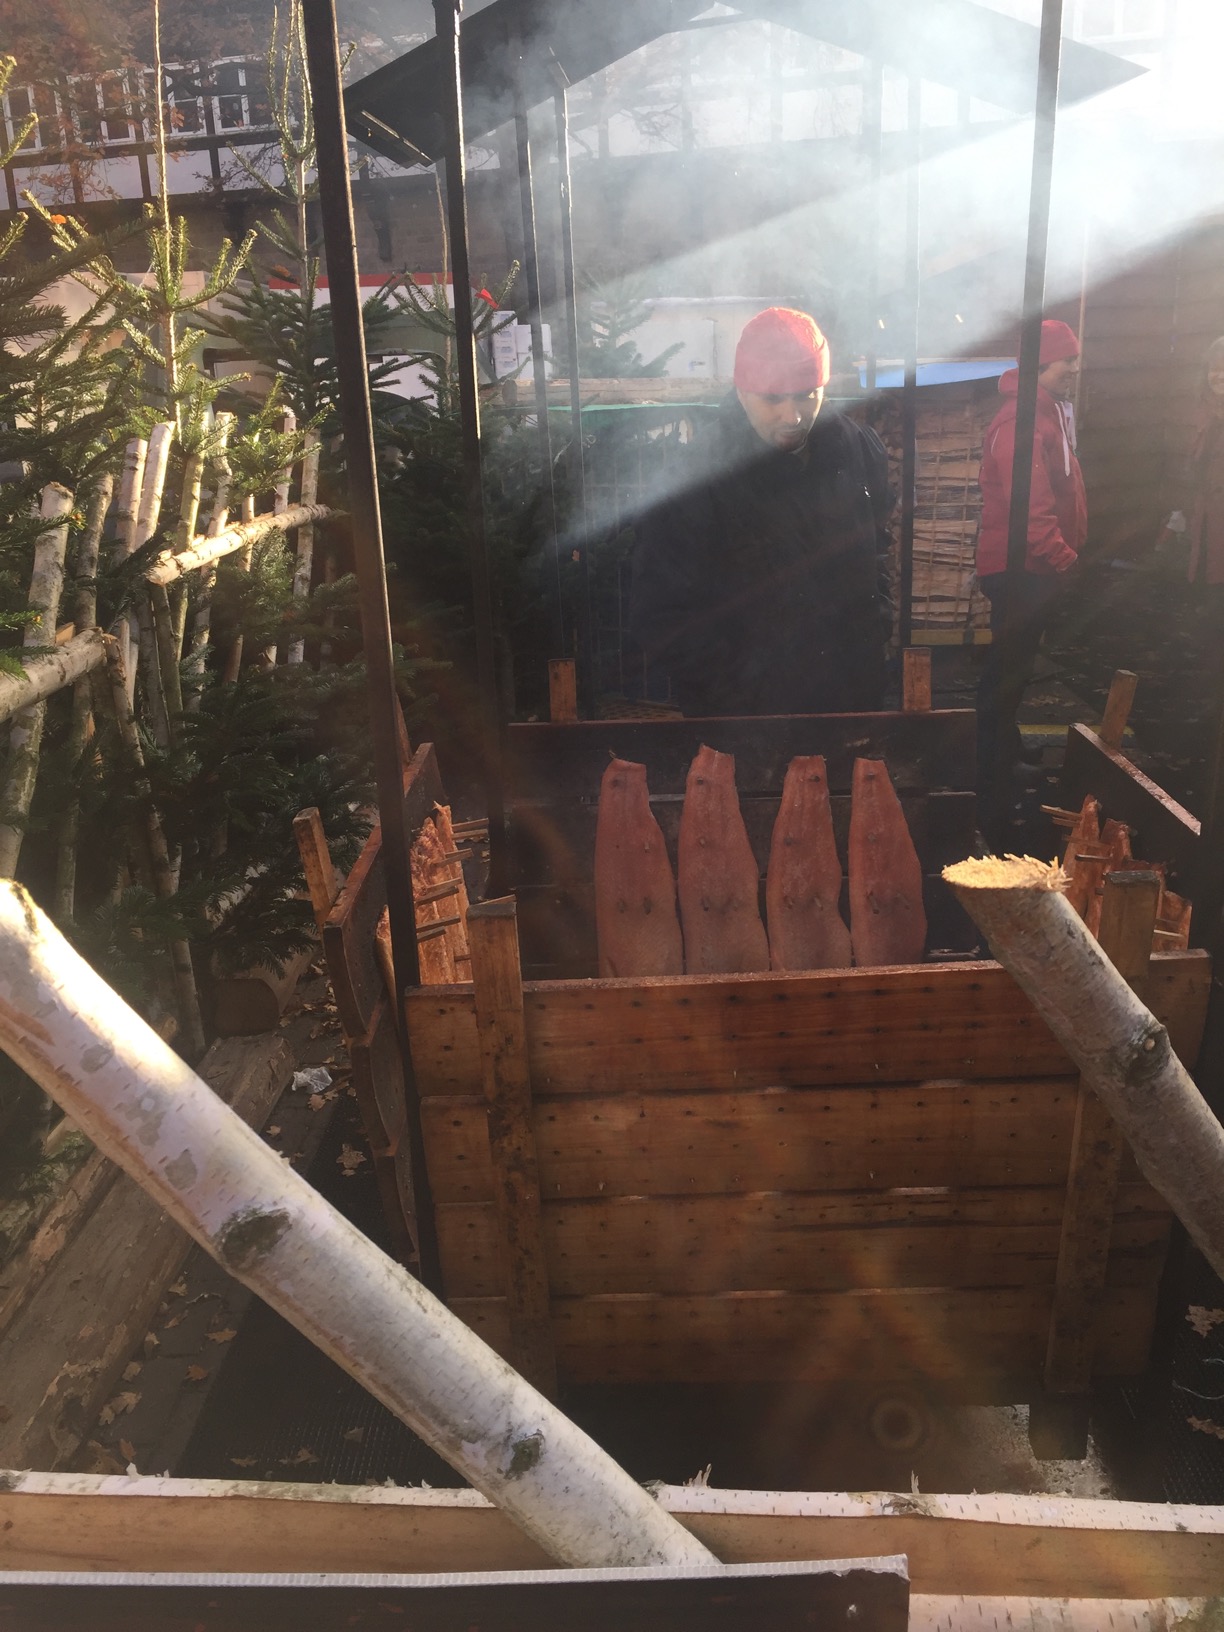 A man looks at a smoking pit surrounded by planks with strips of fish hanging from them.